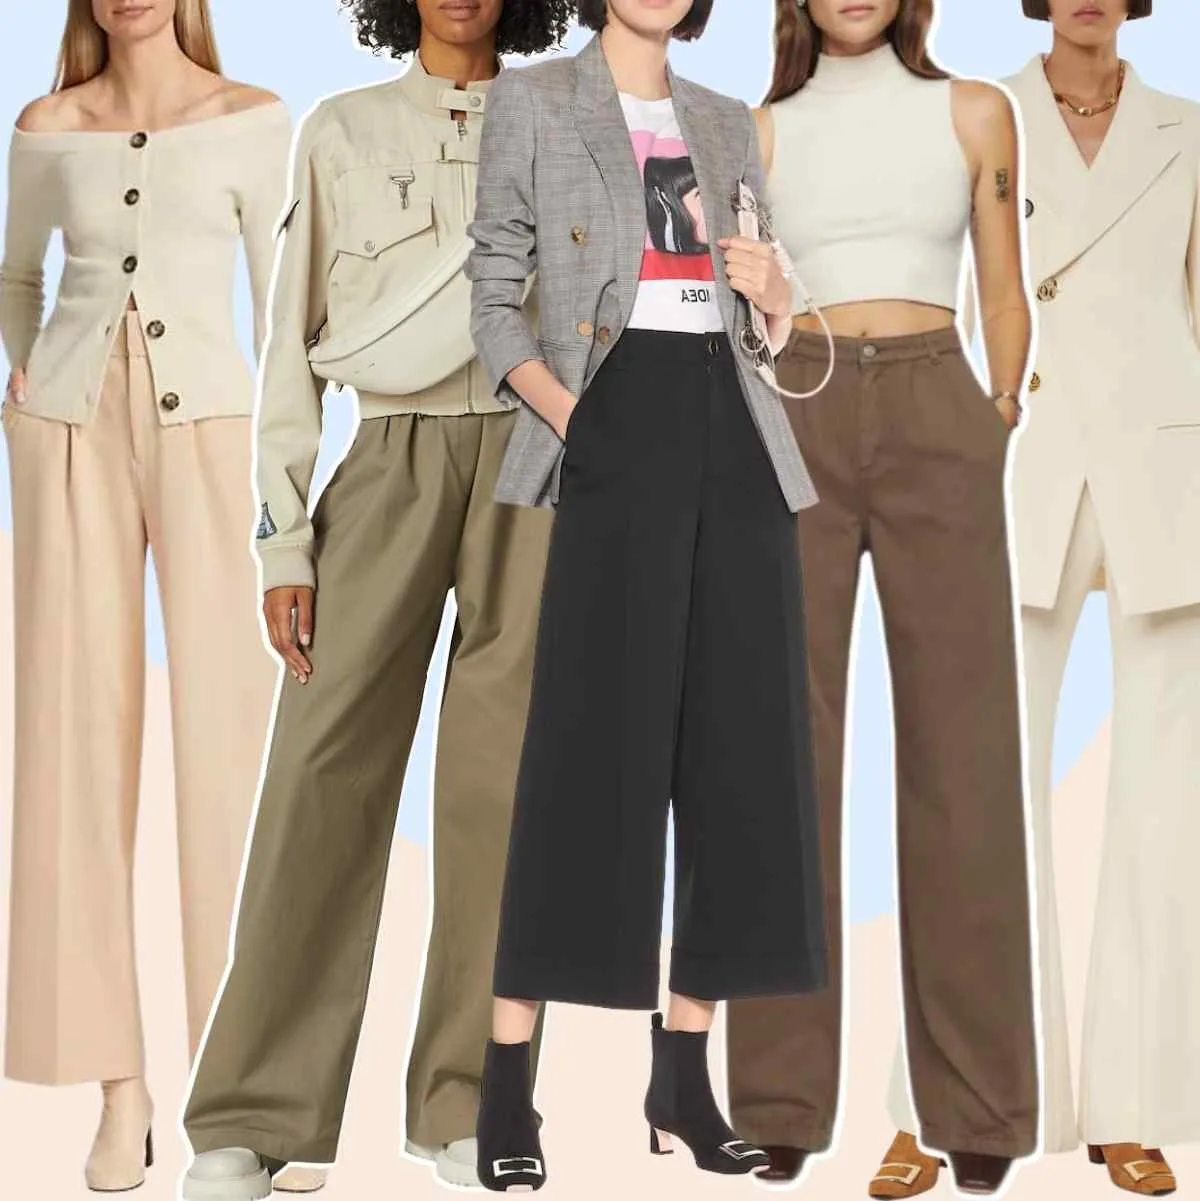 Collage of 5 women wearing different ankle boots with dress pants that are wide legged.